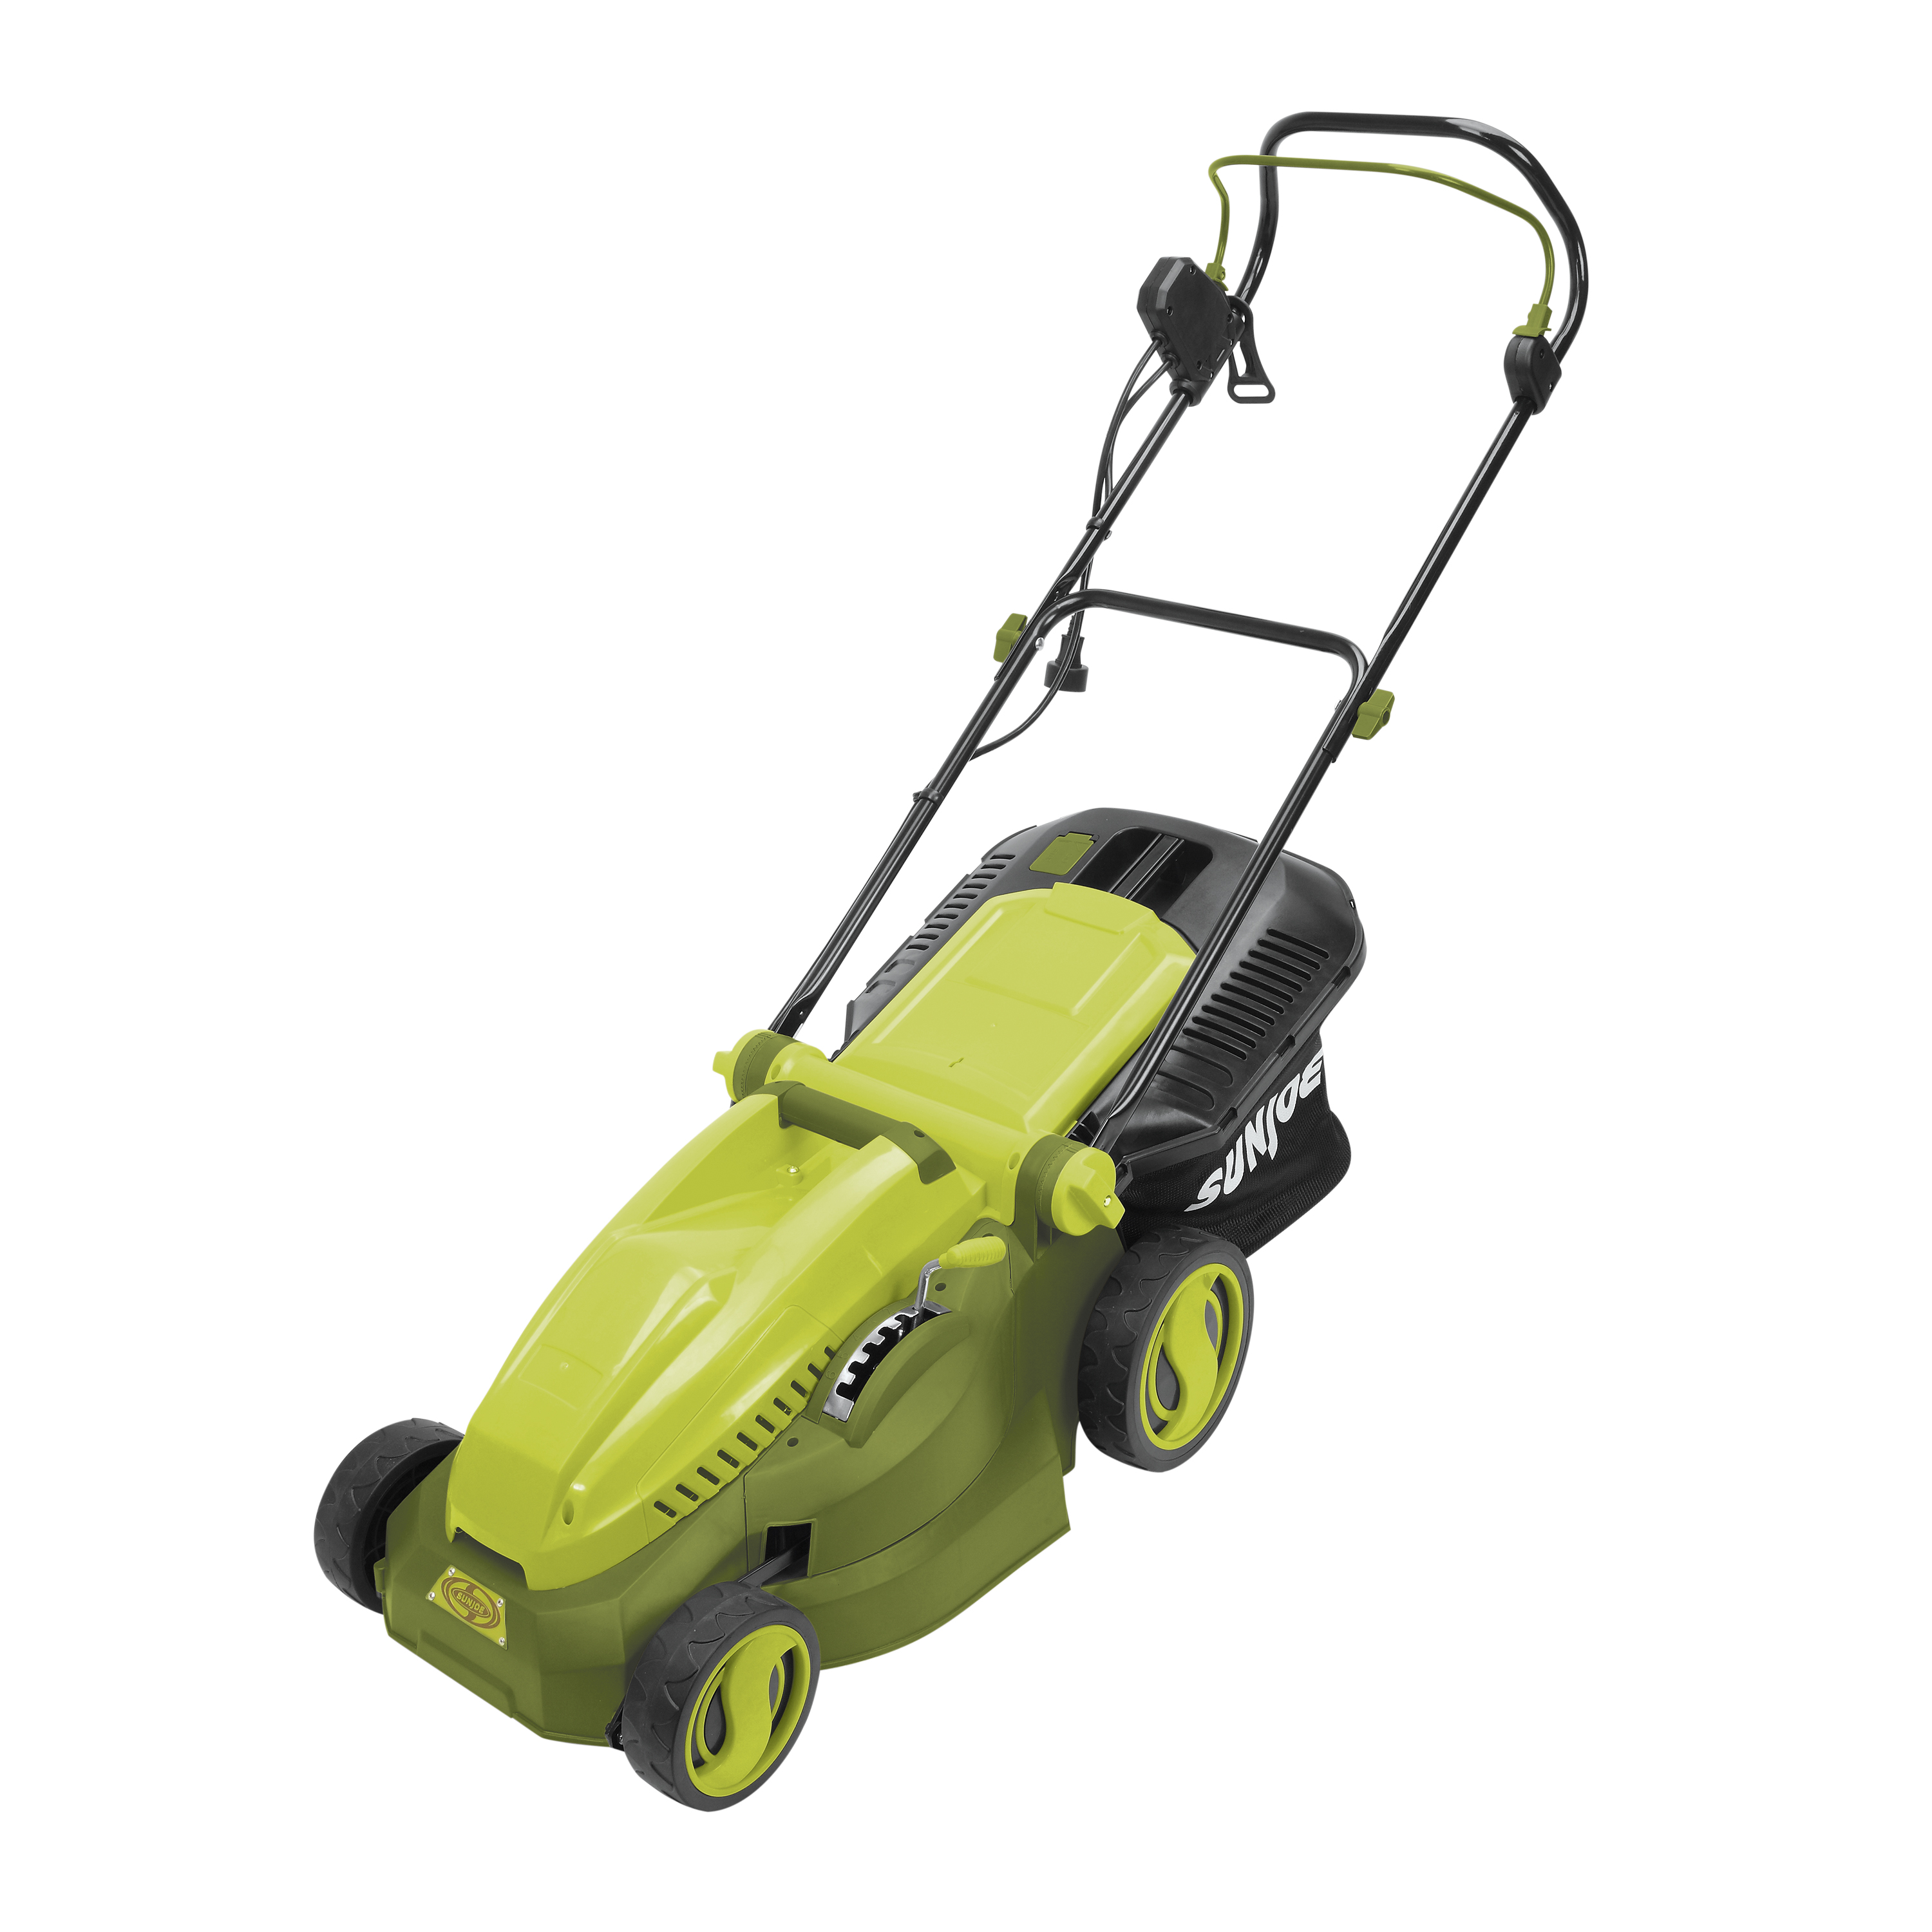 Sun Joe Electric 16-inch Lawn Mower W/ Collection Bag, 12-Amp, 6-Position - image 3 of 15